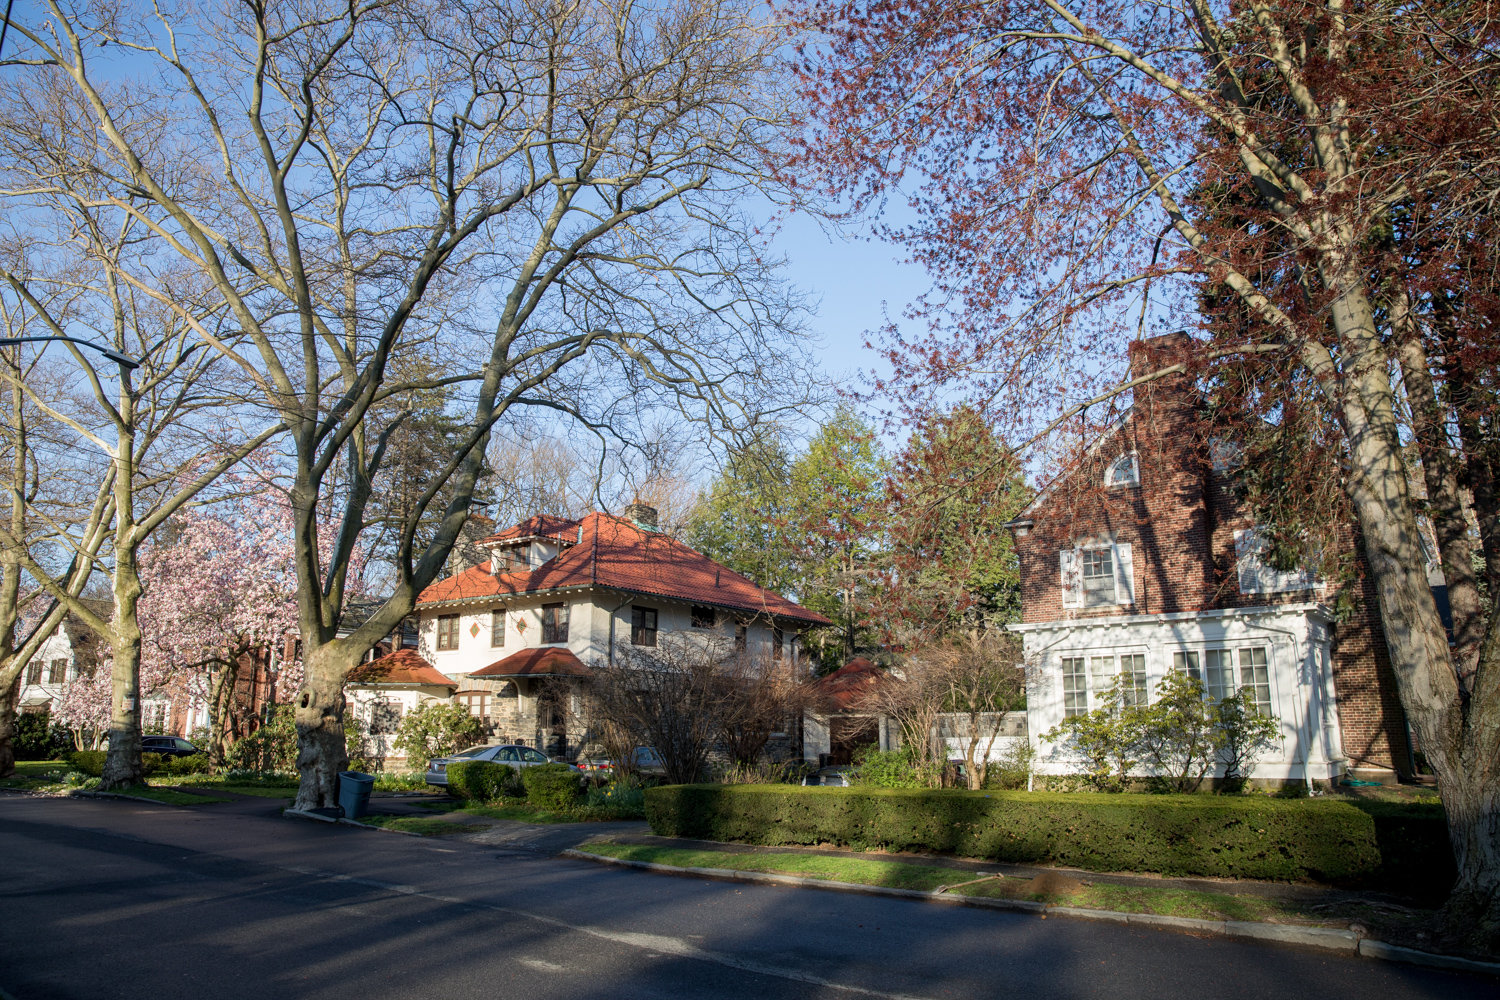 Tibbett Avenue in Fieldston is a picturesque street, and much of the property there happens to be owned by nearby Horace Mann School.